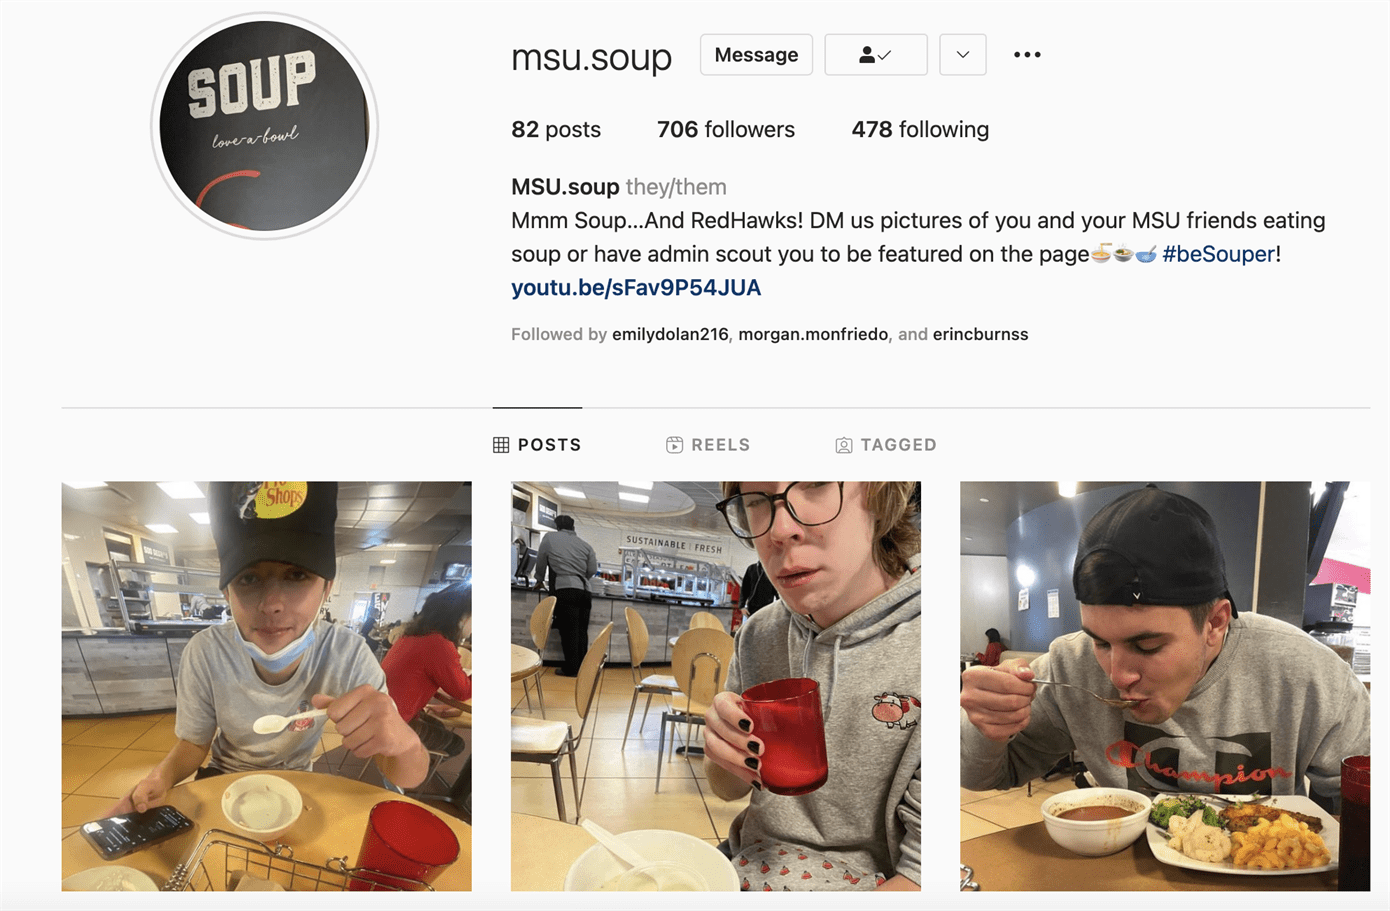 The account posts a new person each day with their bowl of soup somewhere on campus. Photo courtesy of @msu.soup